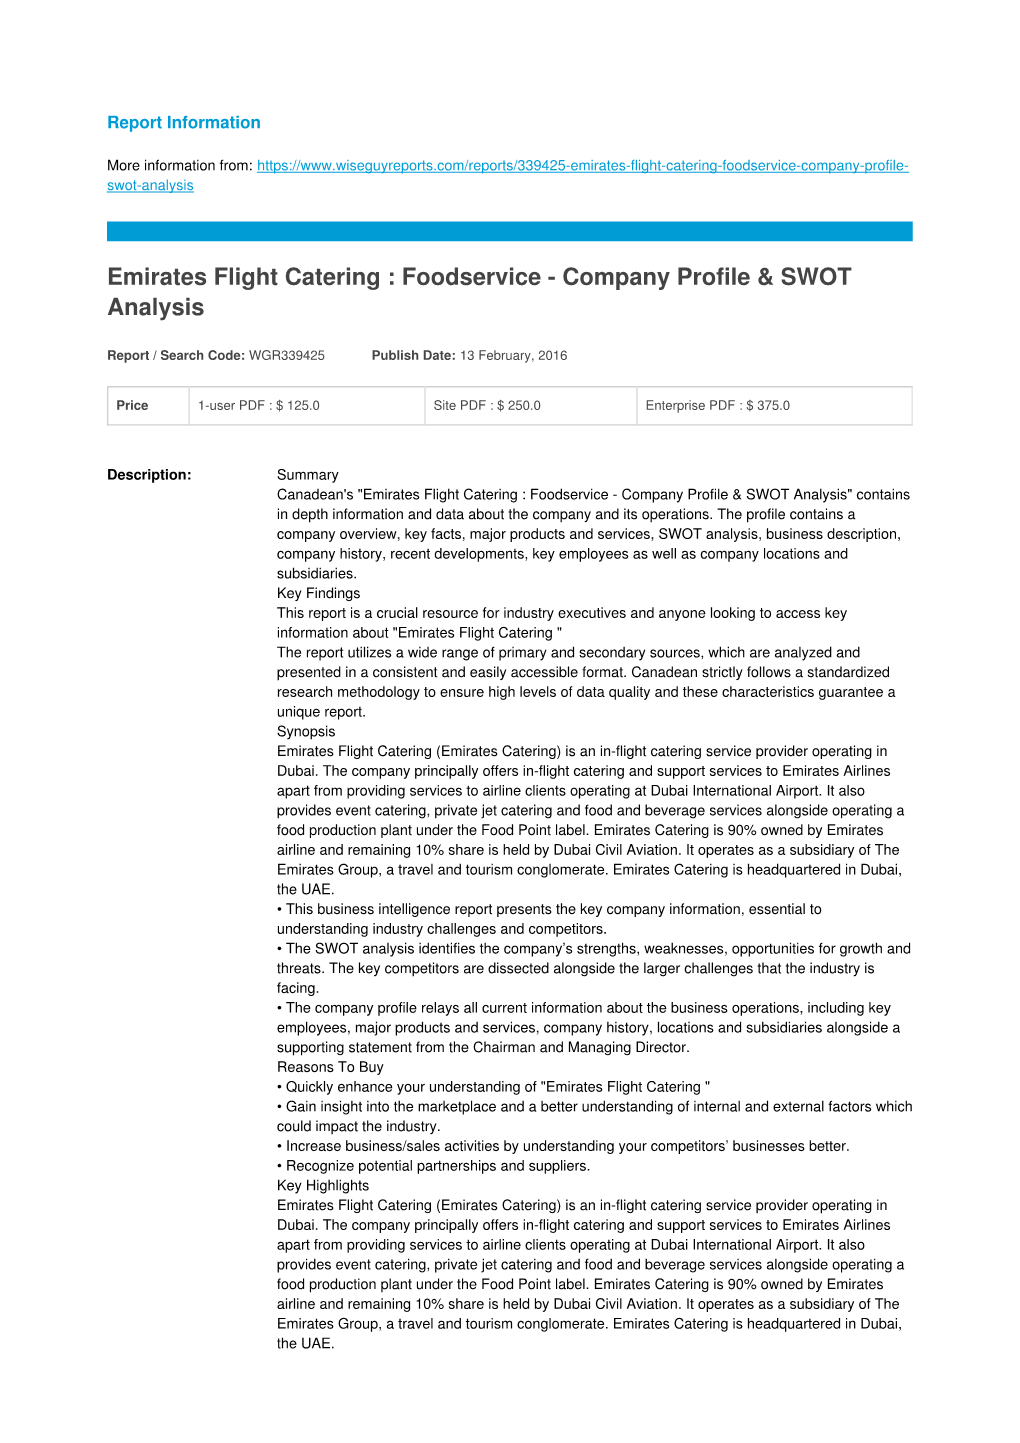 Emirates Flight Catering : Foodservice - Company Profile & SWOT Analysis